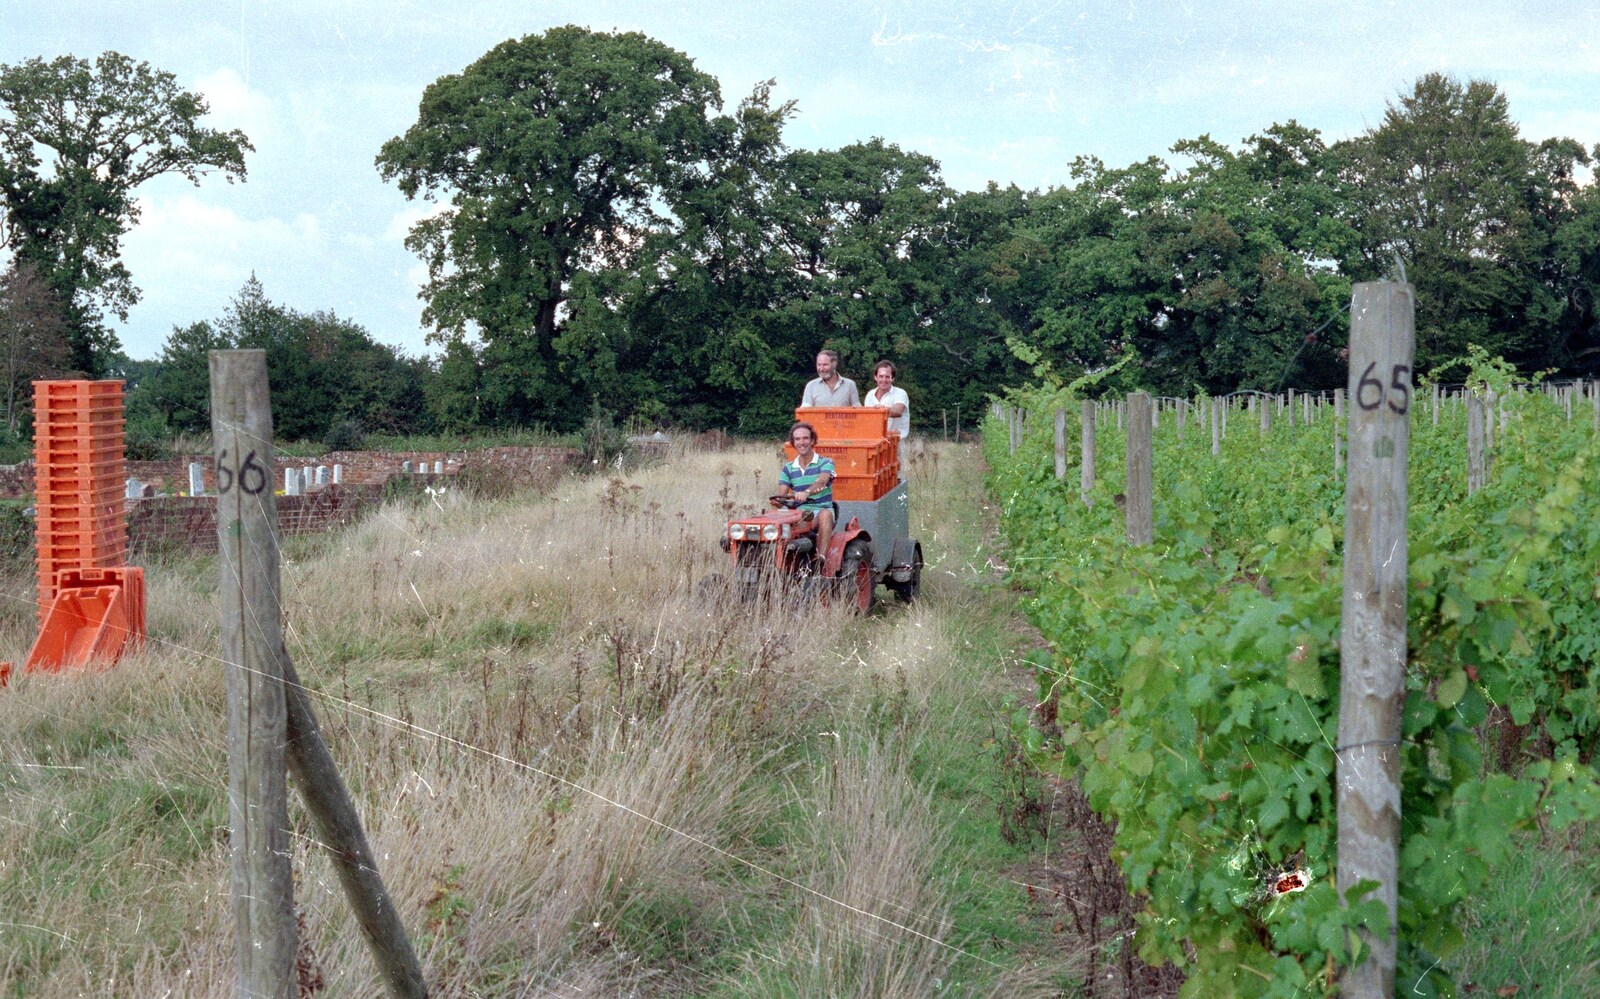 More tractor driving from Harrow Vineyard Harvest and Wootton Winery, Dorset and Somerset - 5th September 1989